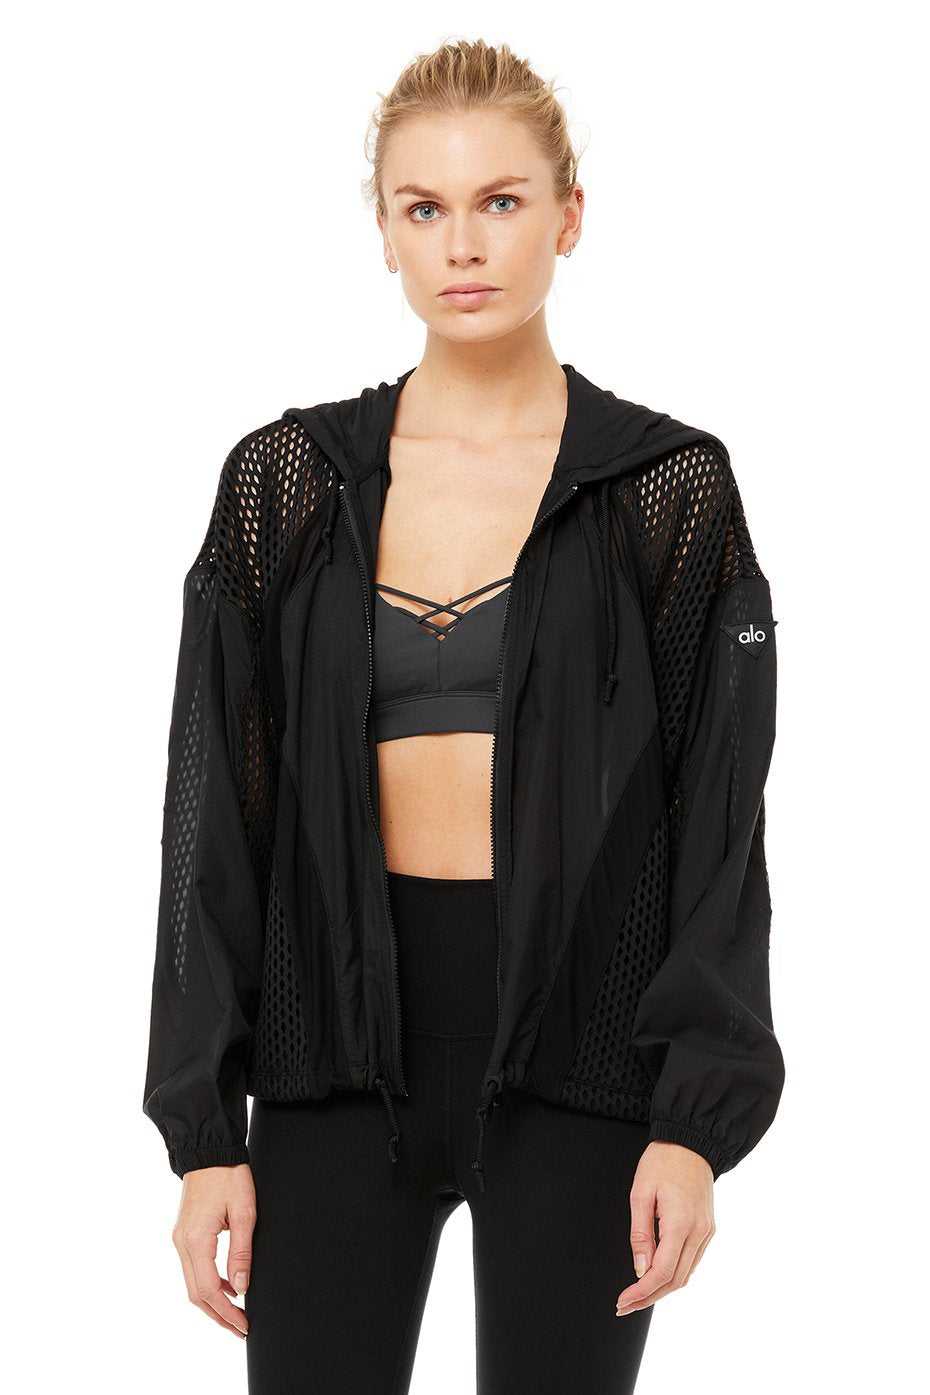 Feature Jacket in Black by Alo Yoga